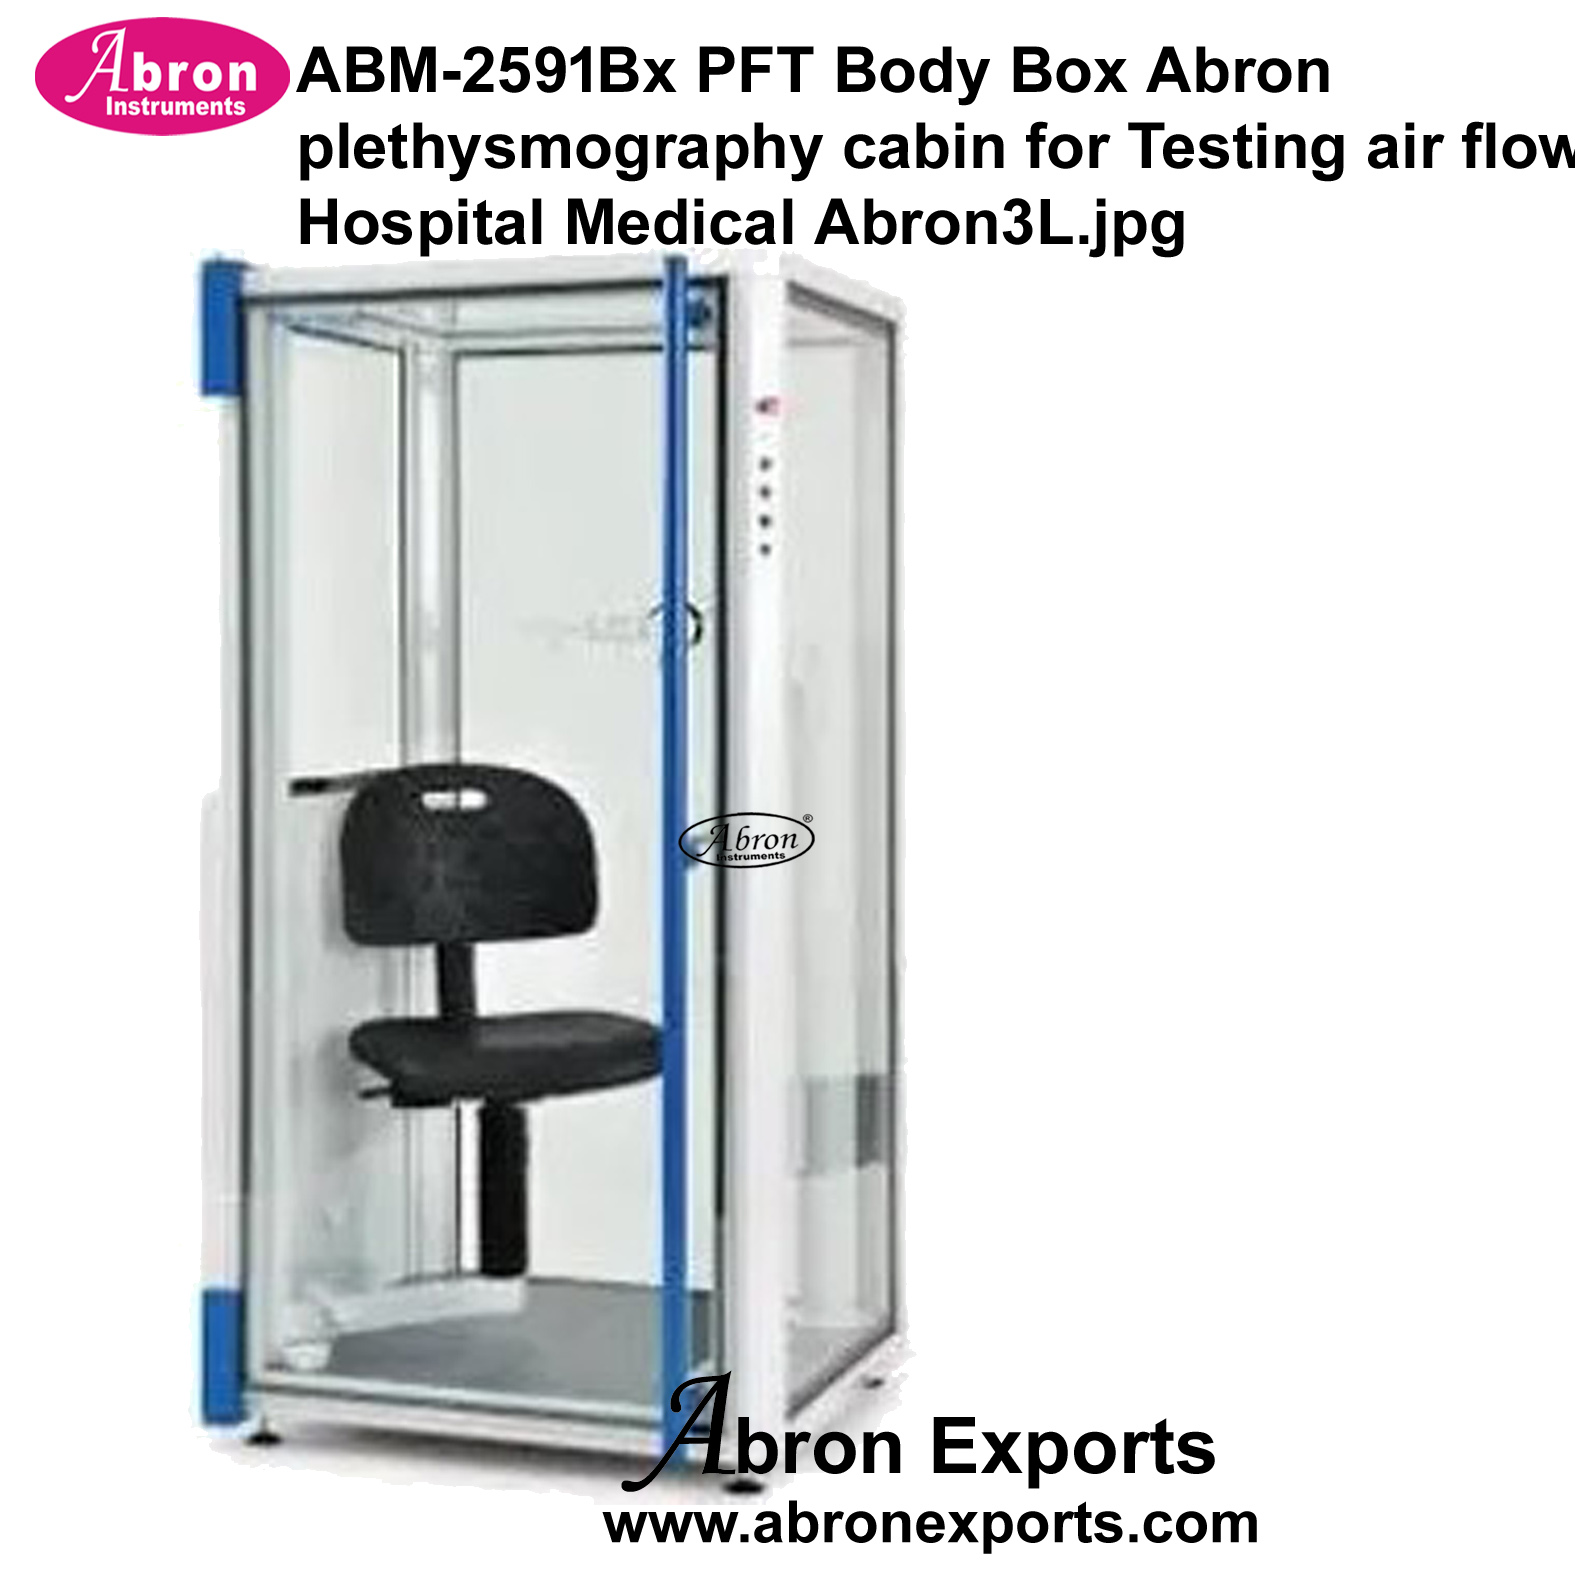 PFT with Body Box Plethysmography Cabin for Testing Air Flow Hospital Medical Abron ABM-2591Bx 